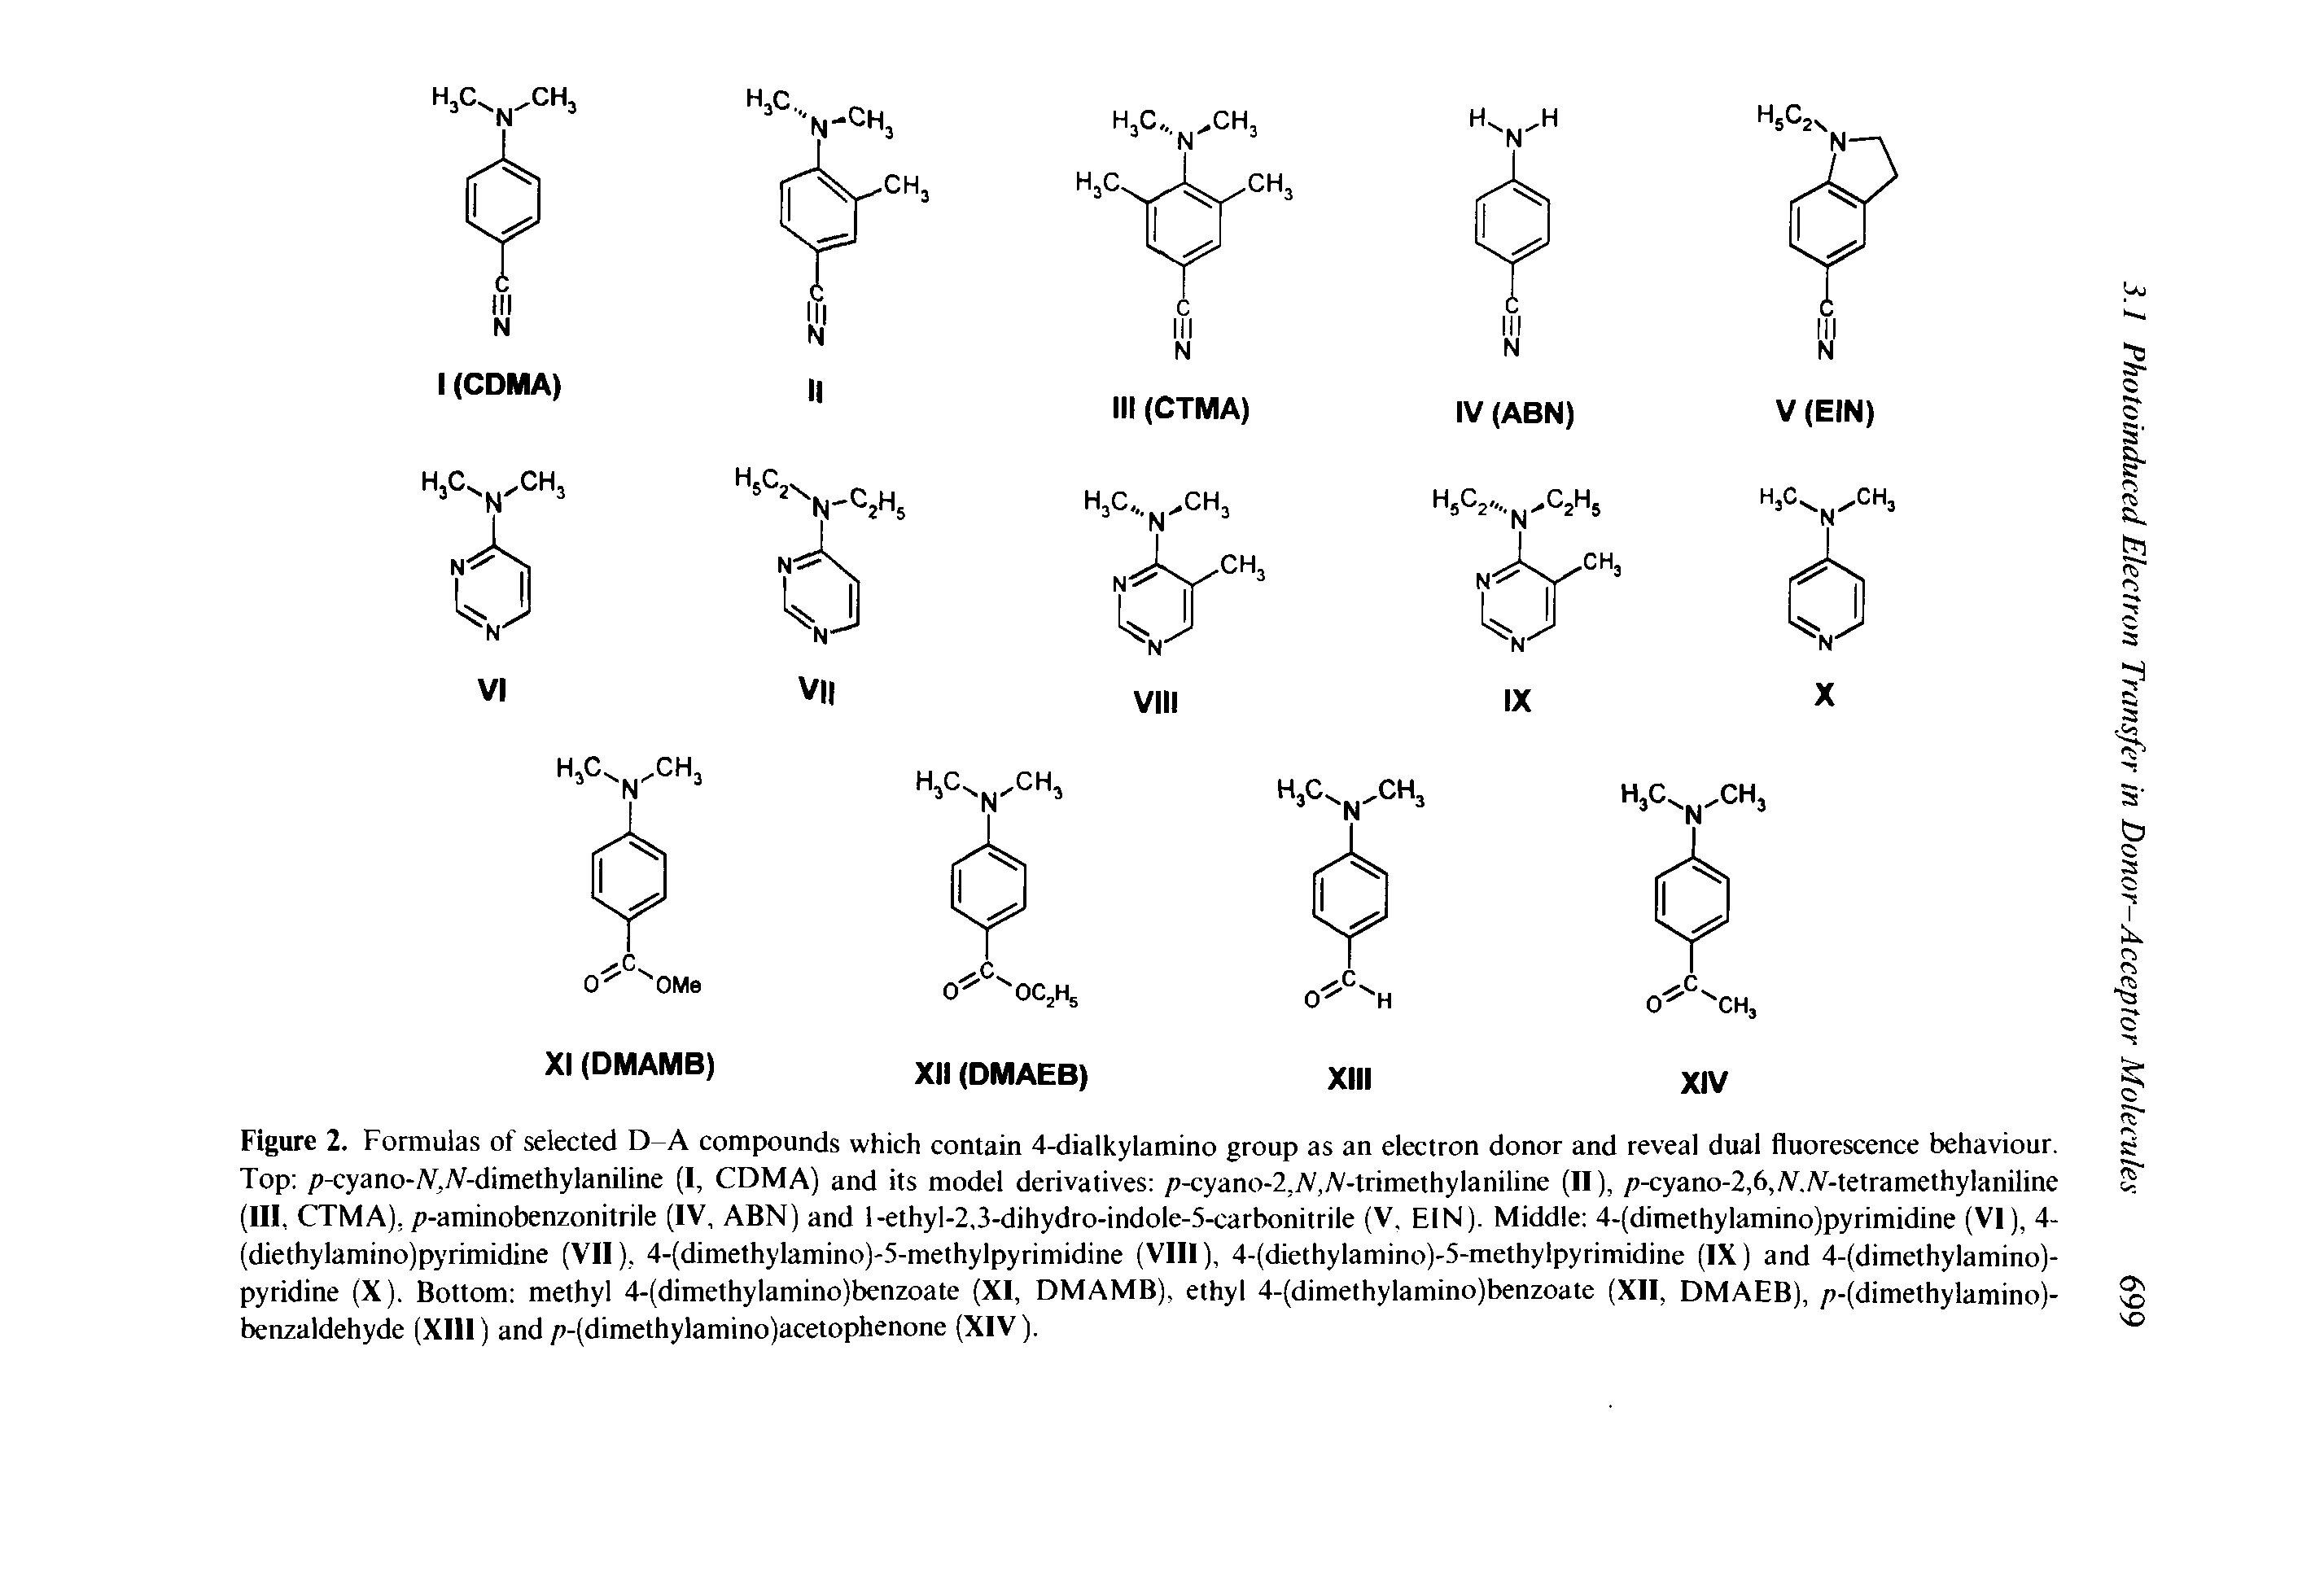 Figure 2. Formulas of selected D-A compounds which contain 4-dialkylamino group as an electron donor and reveal dual fluorescence behaviour. Top /)-cyano-A,A-dimethylaniline (I, CDMA) and its model derivatives p-cyano-2,A,A-trimethylaniline (II), p-cyano-2,6,A.A-tetramethylaniline (III, CTMA)./)-aminobenzonitrile (IV, ABN) and l-ethyl-2,3-dihydro-indole-5-carbonitrile (V. BIN). Middle 4-(dimethylamino)pyrimidine (VI), 4-(diethylamino)pyrimidine (VTI), 4-(dimethylamino)-5-methylpyrimidine (VIII), 4-(diethylamino)-5-methylpyrimidine (IX) and 4-(dimethylamino)-pyridine (X). Bottom methyl 4-(dimethylamino)benzoate (XI, DMAMB), ethyl 4-(dimethylamino)benzoate (XII, DMAEB), p-(dimethylamino)-benzaldehyde (XIll) and />-(dimethylamino)acetophenone (XIV).